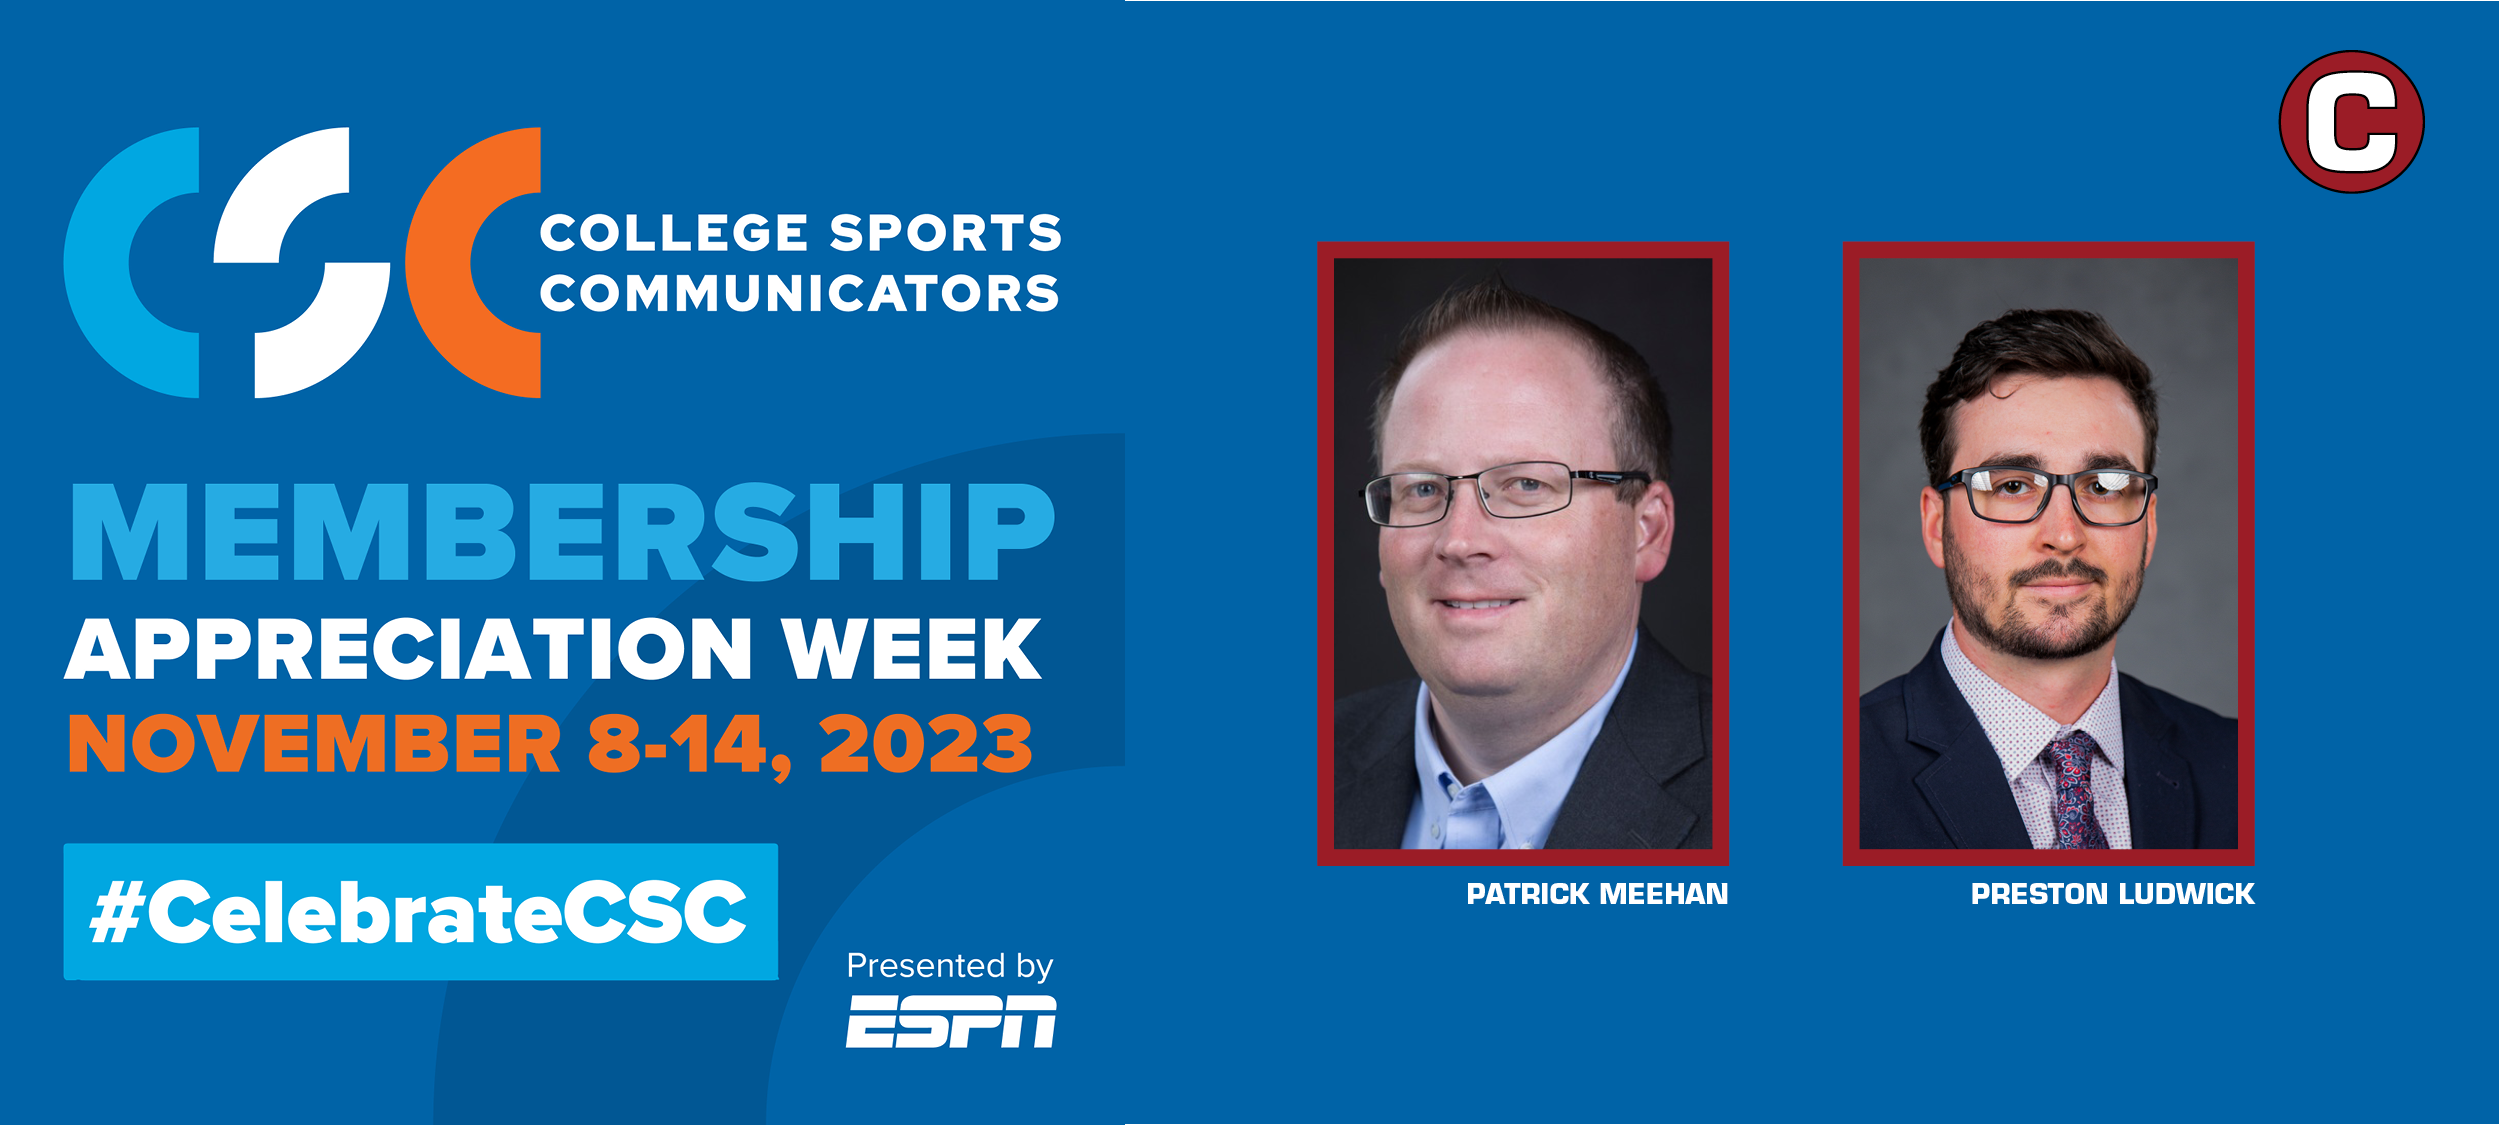 Patrick Meehan and Preston Ludwick are in the spotlight this week as Centenary celebrates College Sports Communicators (CSC) Membership Appreciation Week.